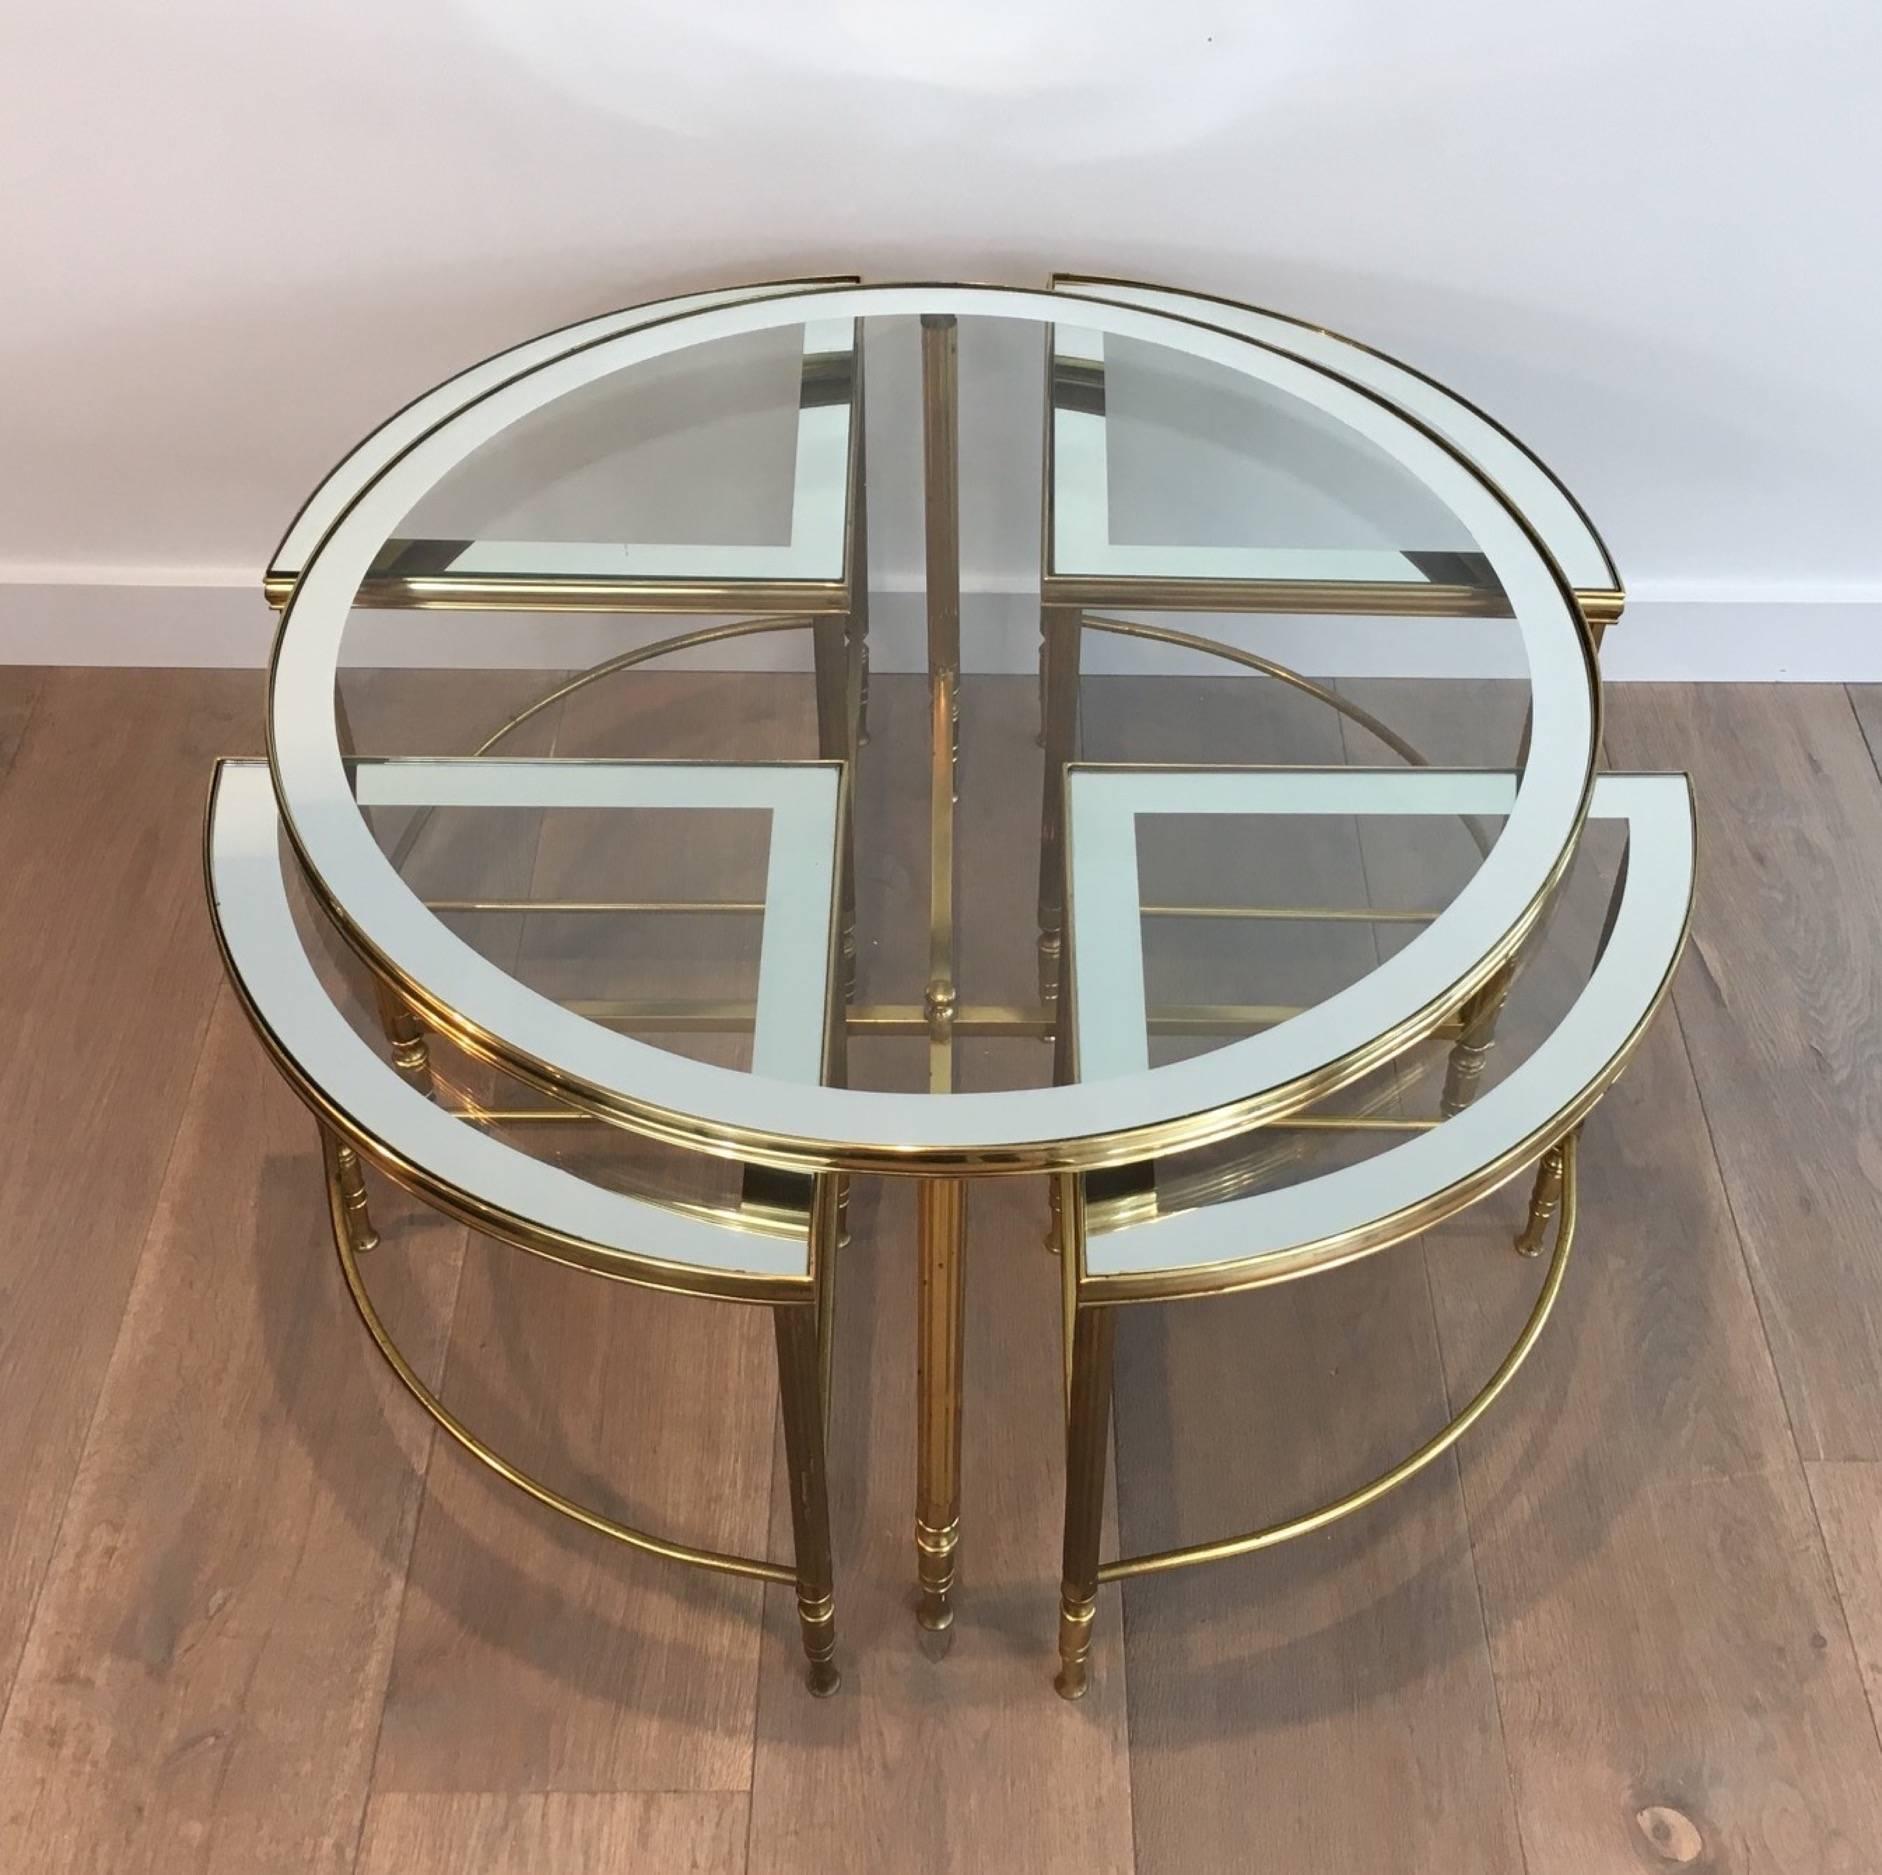 Neoclassical Round Brass Coffee Table with Four Smaller Nesting Tables